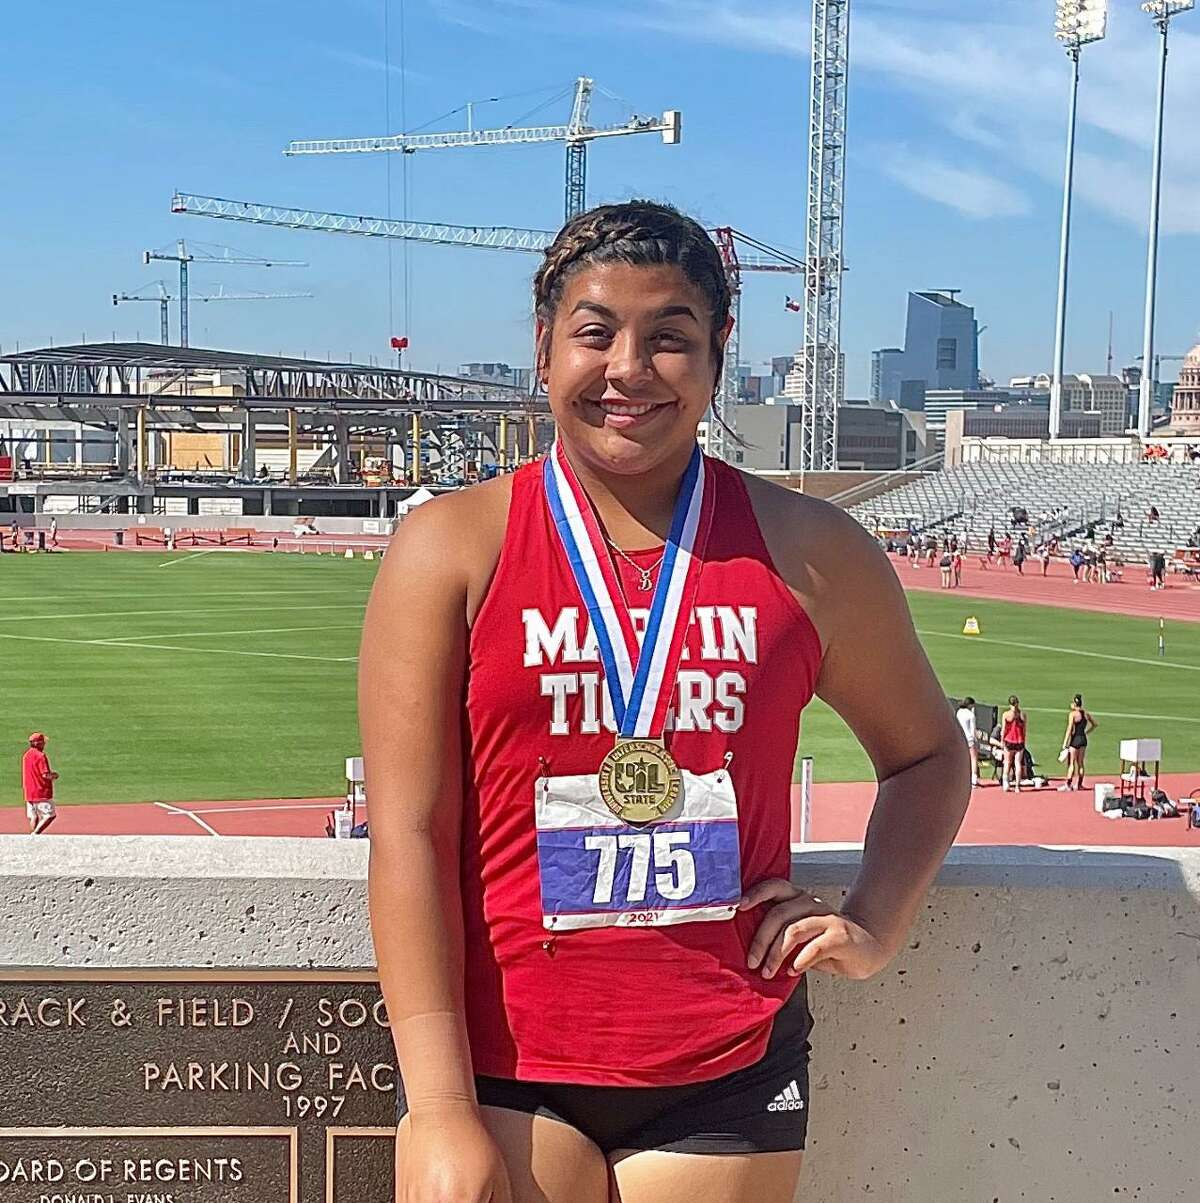 Melanie Duron broke her city record with a throw of 45-0 in the shot put Friday to win the state title.